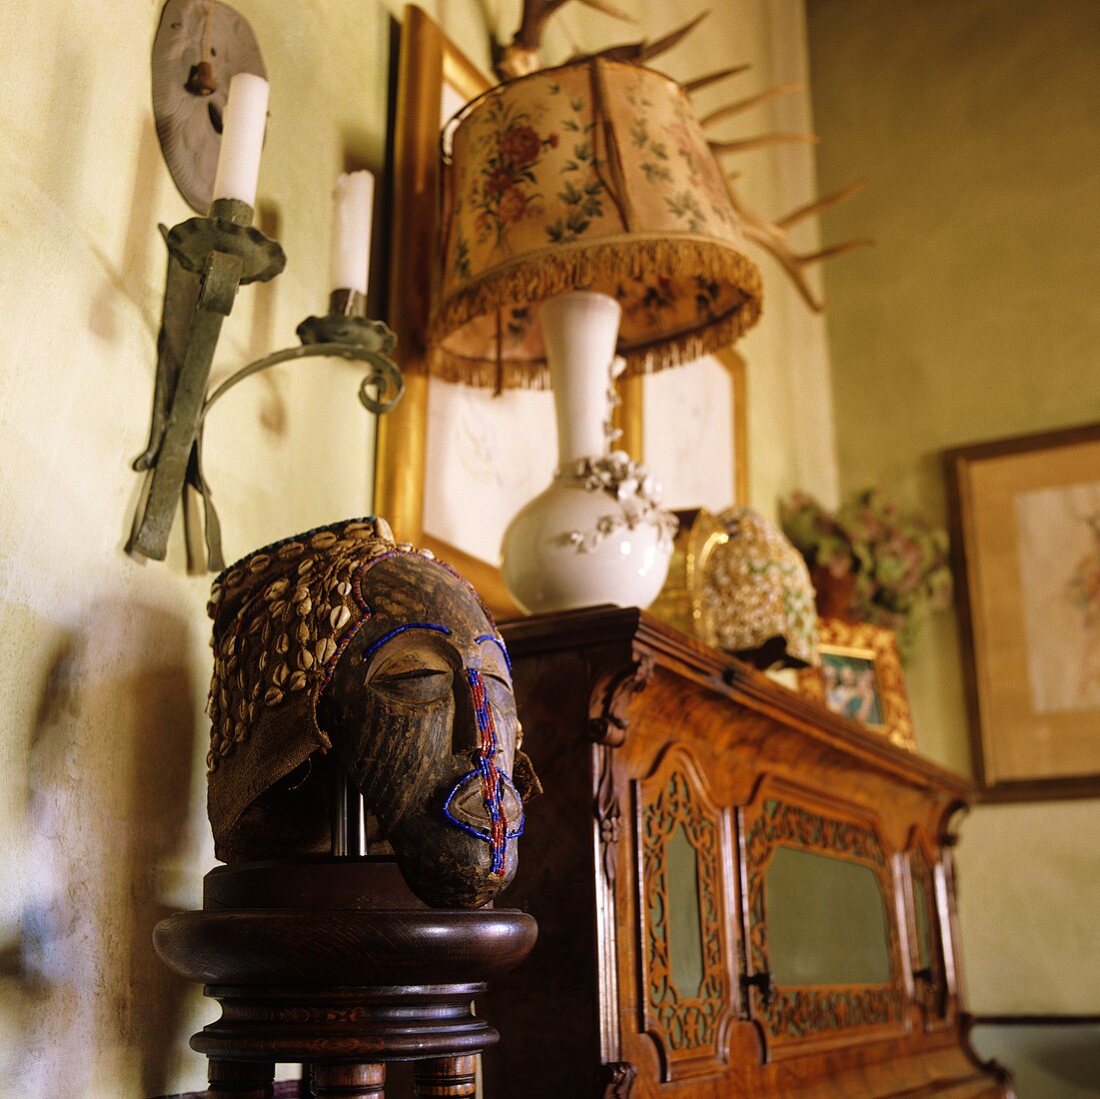 Table lamp with fabric shade on an antique wooden cabinet and painted bust made of wood